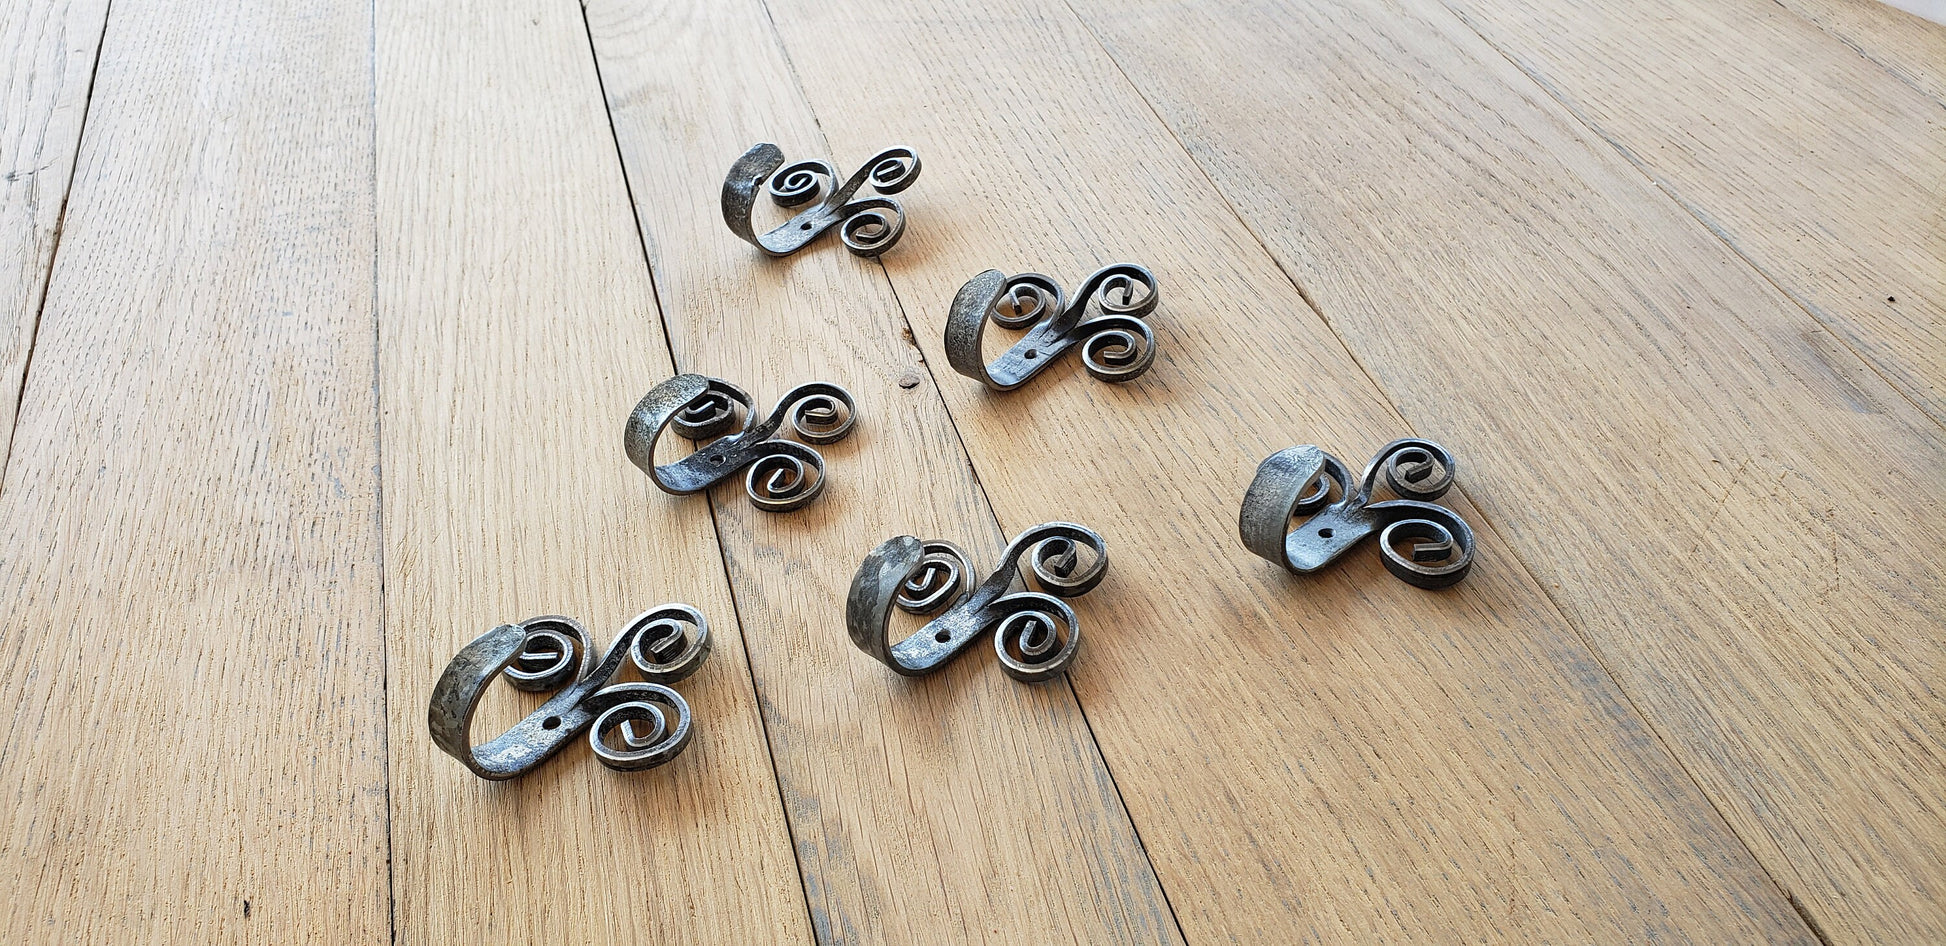 Wine Barrel Ring Wall Hooks - Florina - Set of 3 Made from retired California wine barrel rings. 100% Recycled!